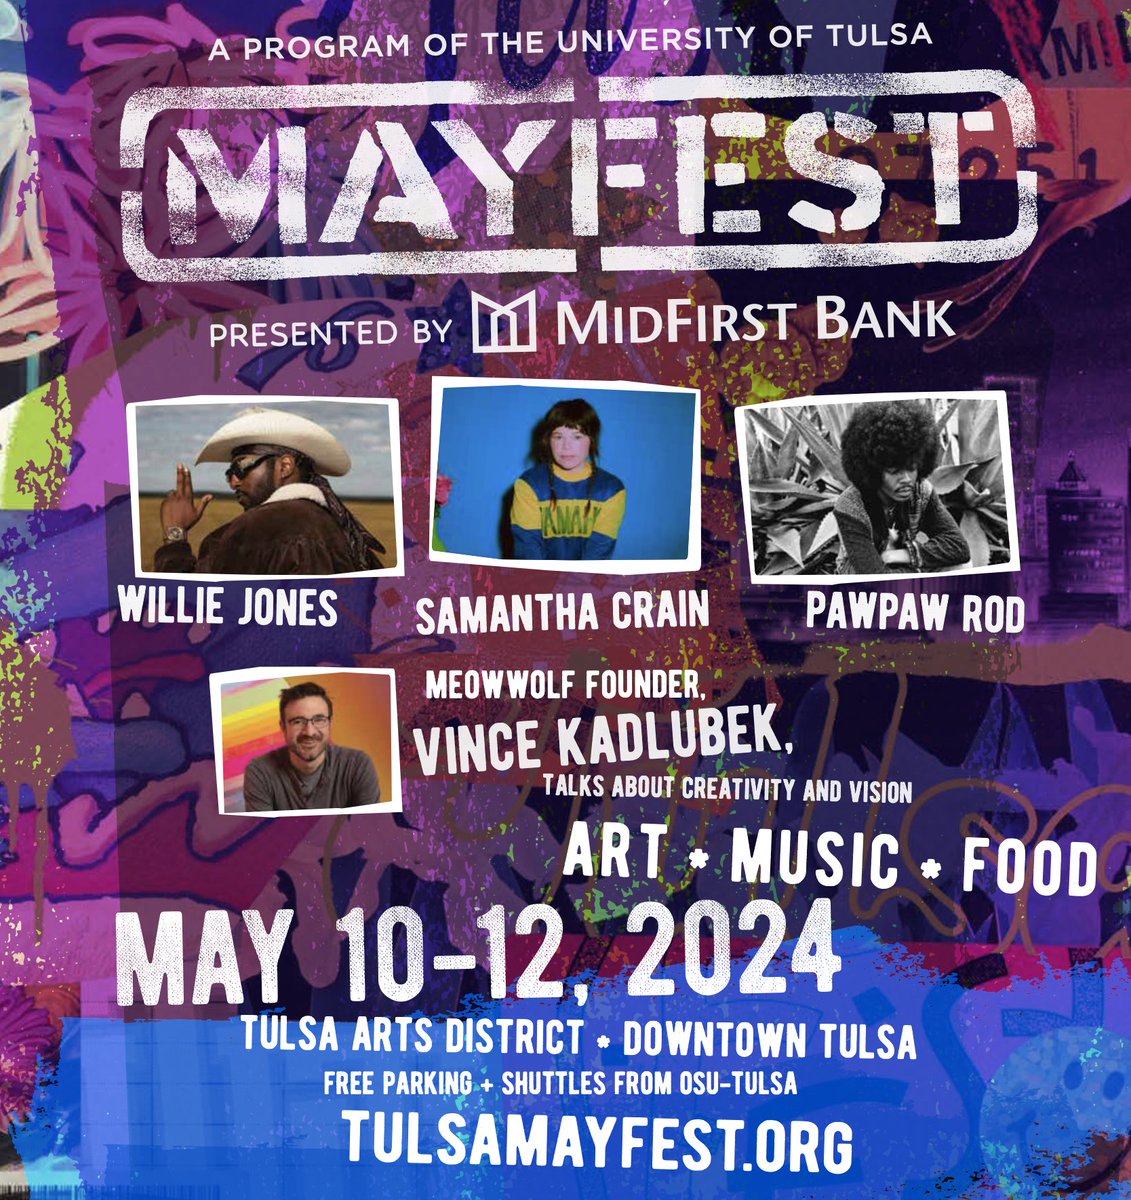 5️⃣ days until Mayfest Presented by @MidFirst kicks off in downtown #Tulsa 😲 Here's a look at our headliners this year: Willie Jones Samantha Crain Pawpaw Rod @MeowWolf Founder Vince Kadlubek